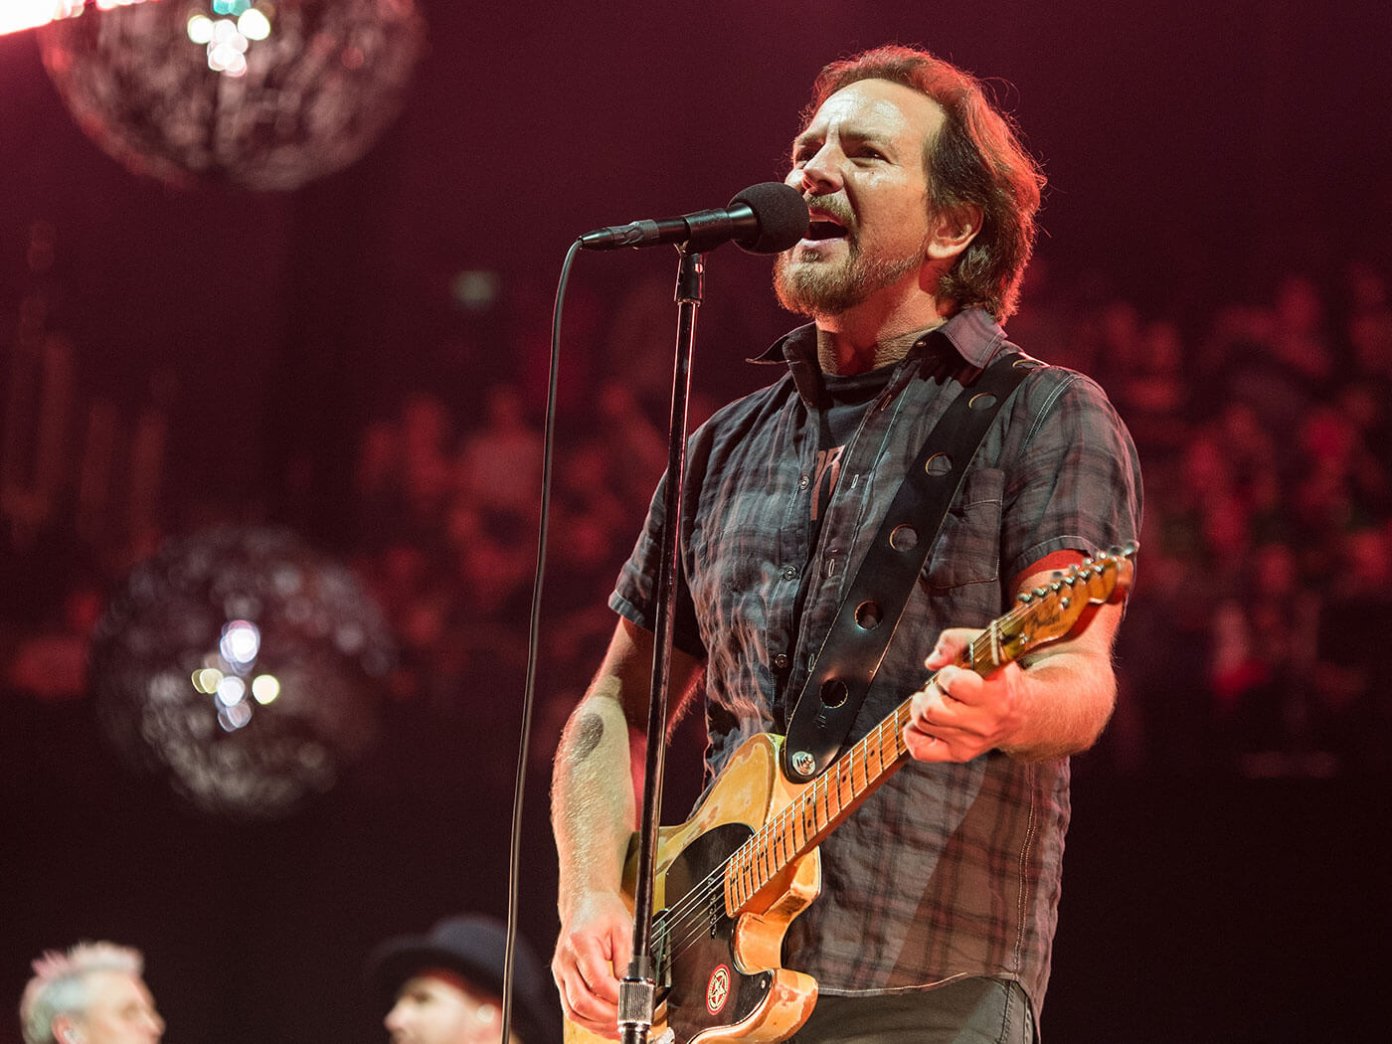 Eddie Vedder will debut two new songs at online benefit gig